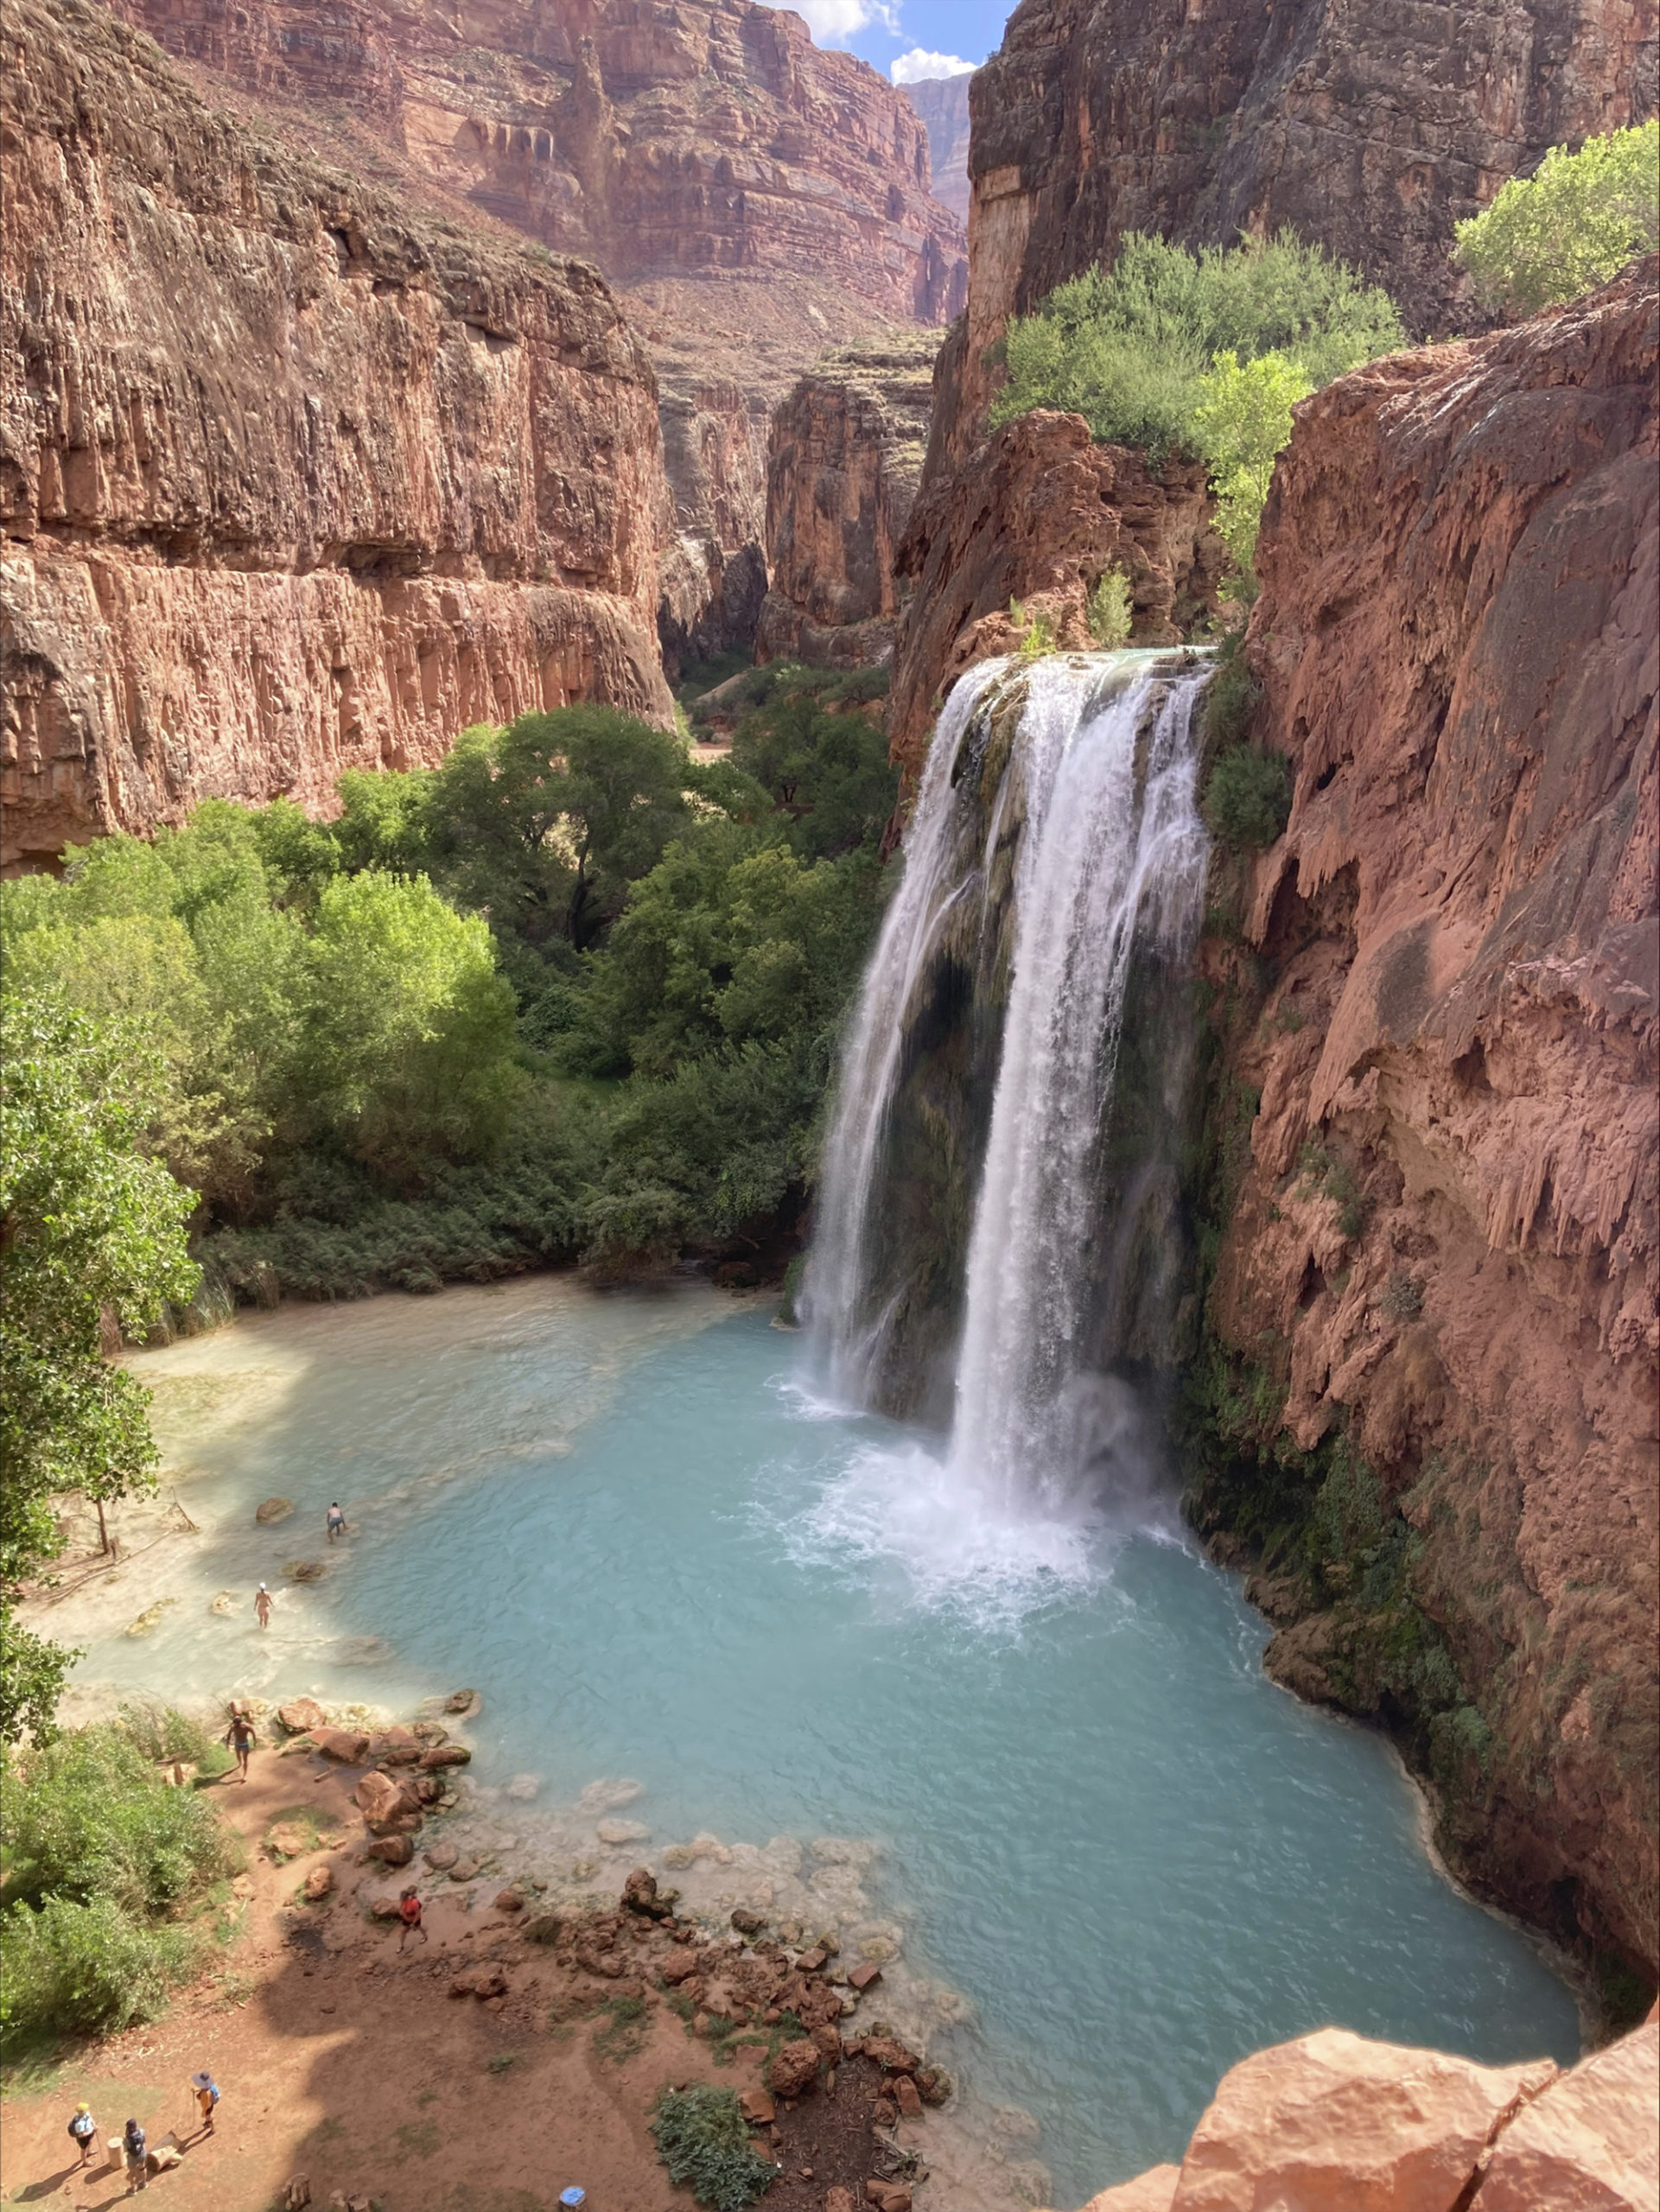 Outbreak at Grand Canyon Sickens Many – Could Water Be the Cause?